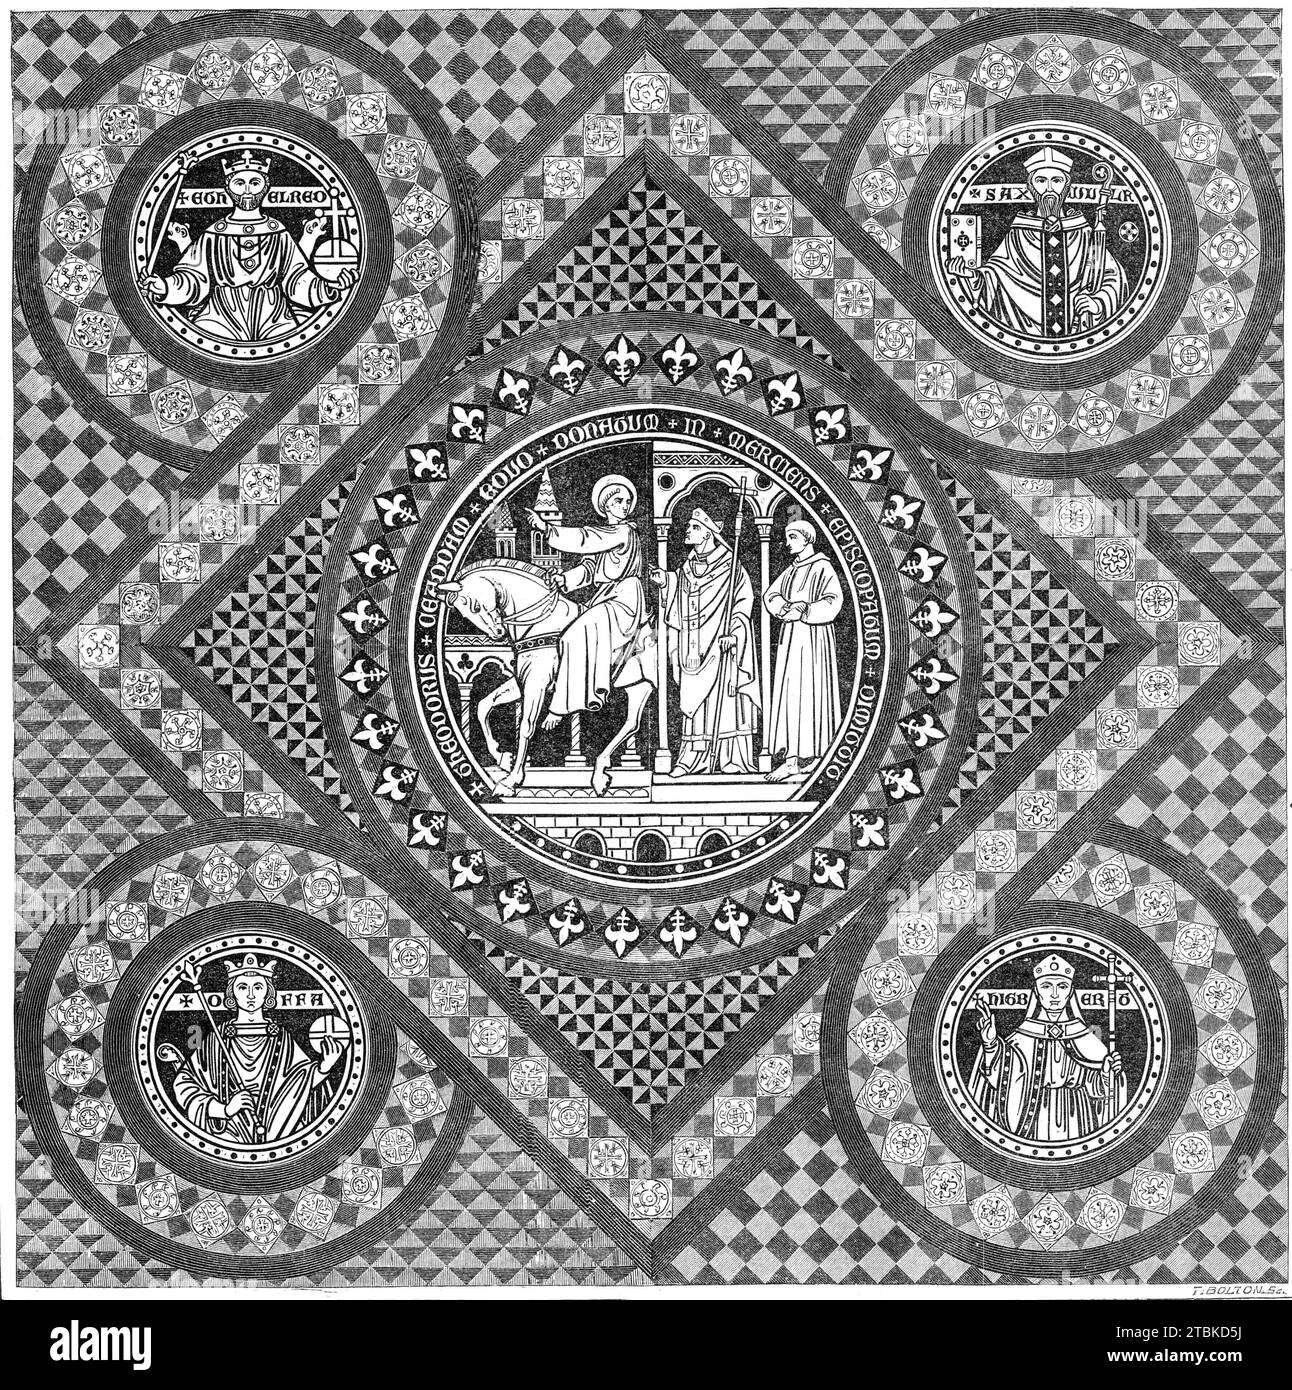 Incised pavement in Lichfield Cathedral, 1861. St Chad on horseback. 'Amongst the many noteworthy works comprised in the recent restorations, under G. G. Scott, R.A....is conspicuous the elaborately-wrought pavement...This work is principally remarkable from its representation of a process which has scarcely been recognised in our late revival of ancient art. We allude to the execution of &quot;storied&quot; pavements...rich with illustrations of sacred history and significance...The pavement...has been subdivided quarterly. In each division is a circular slab, upwards of 3ft. in diameter, of Stock Photo